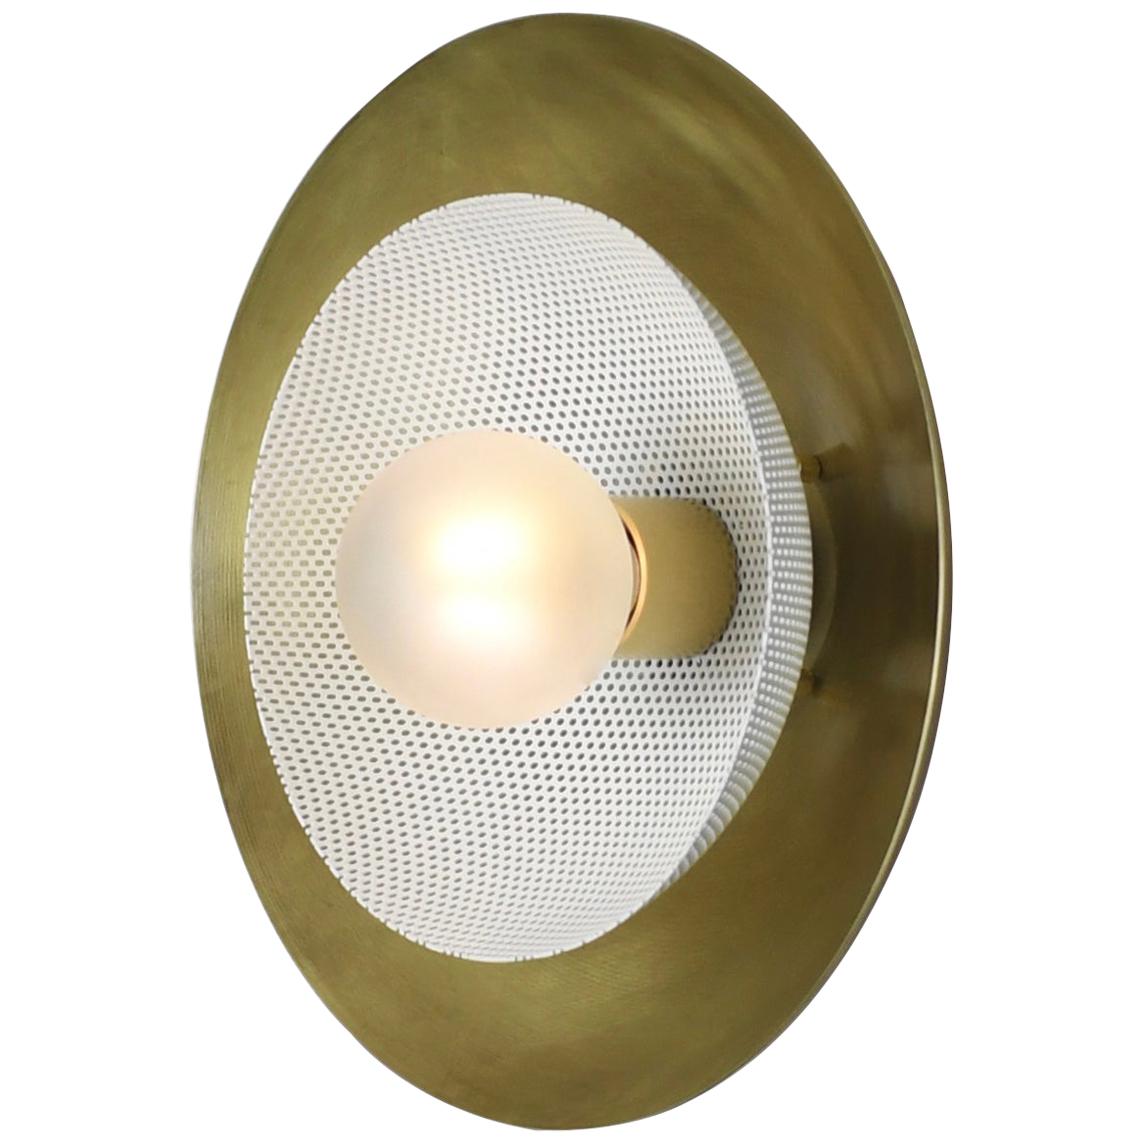 Centric Wall Sconce in Solid Brass and Cream Enamel Mesh Blueprint Lighting 2019